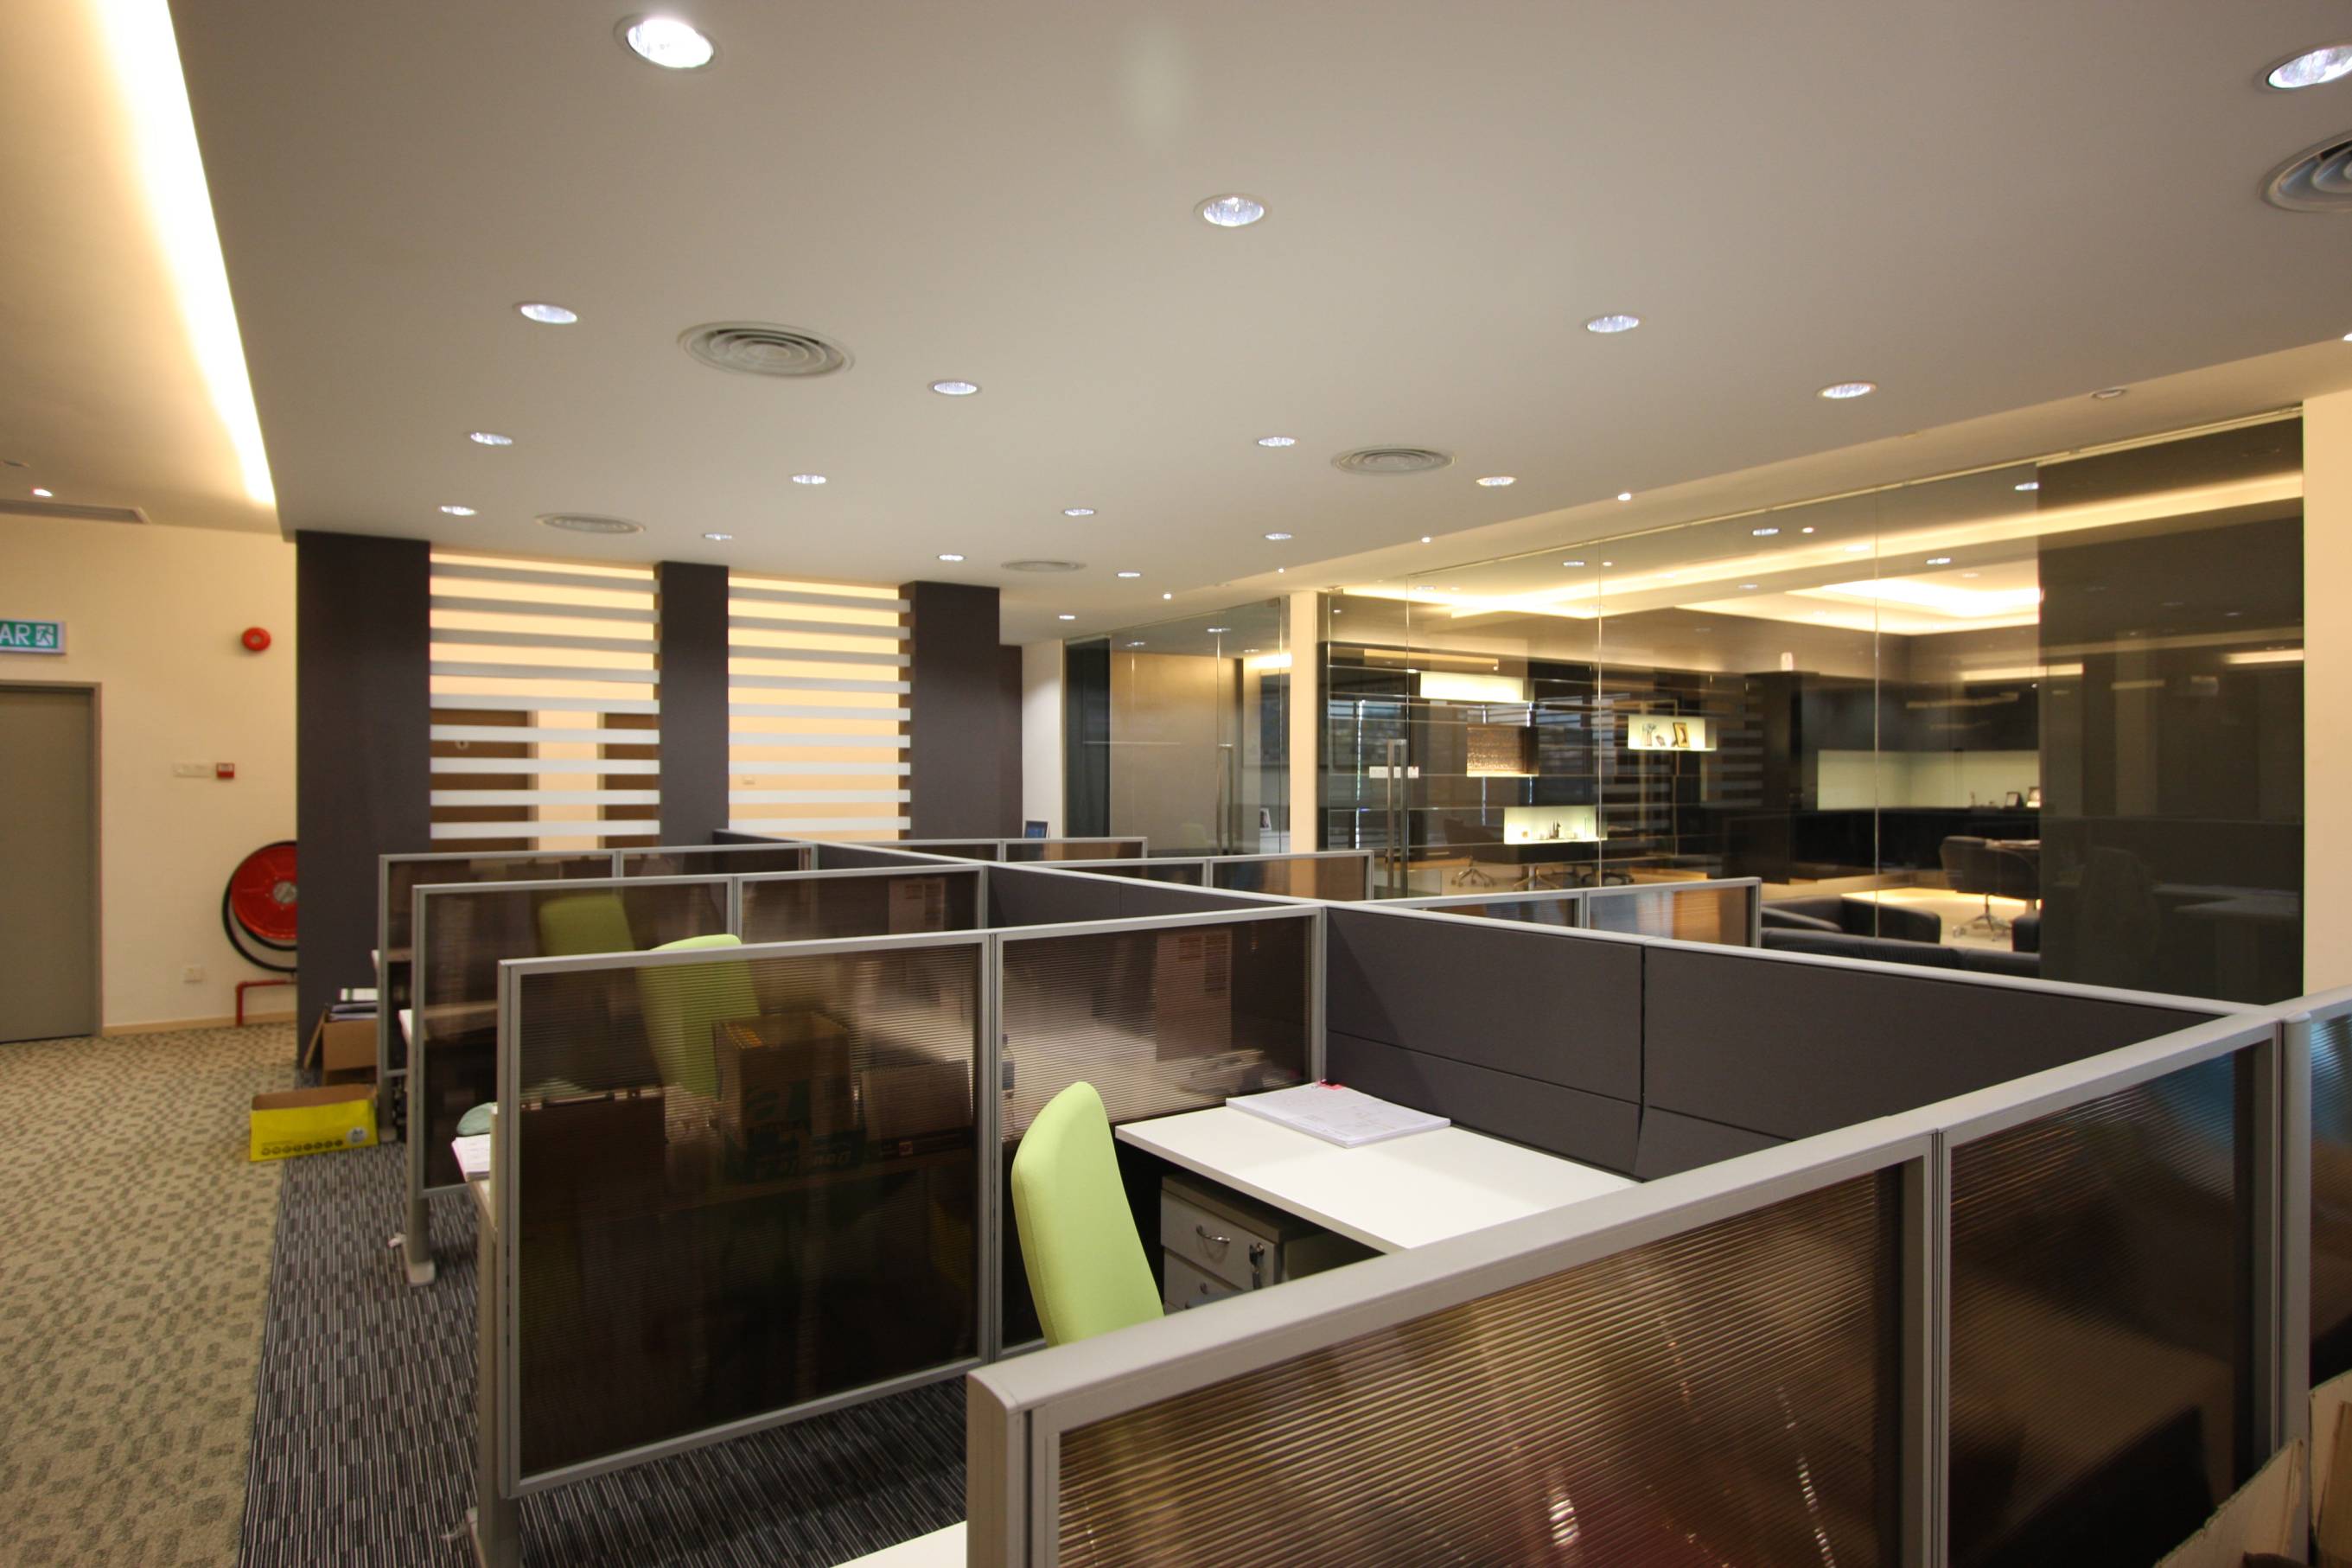 Modern and Functional Office-16026441527.jpg